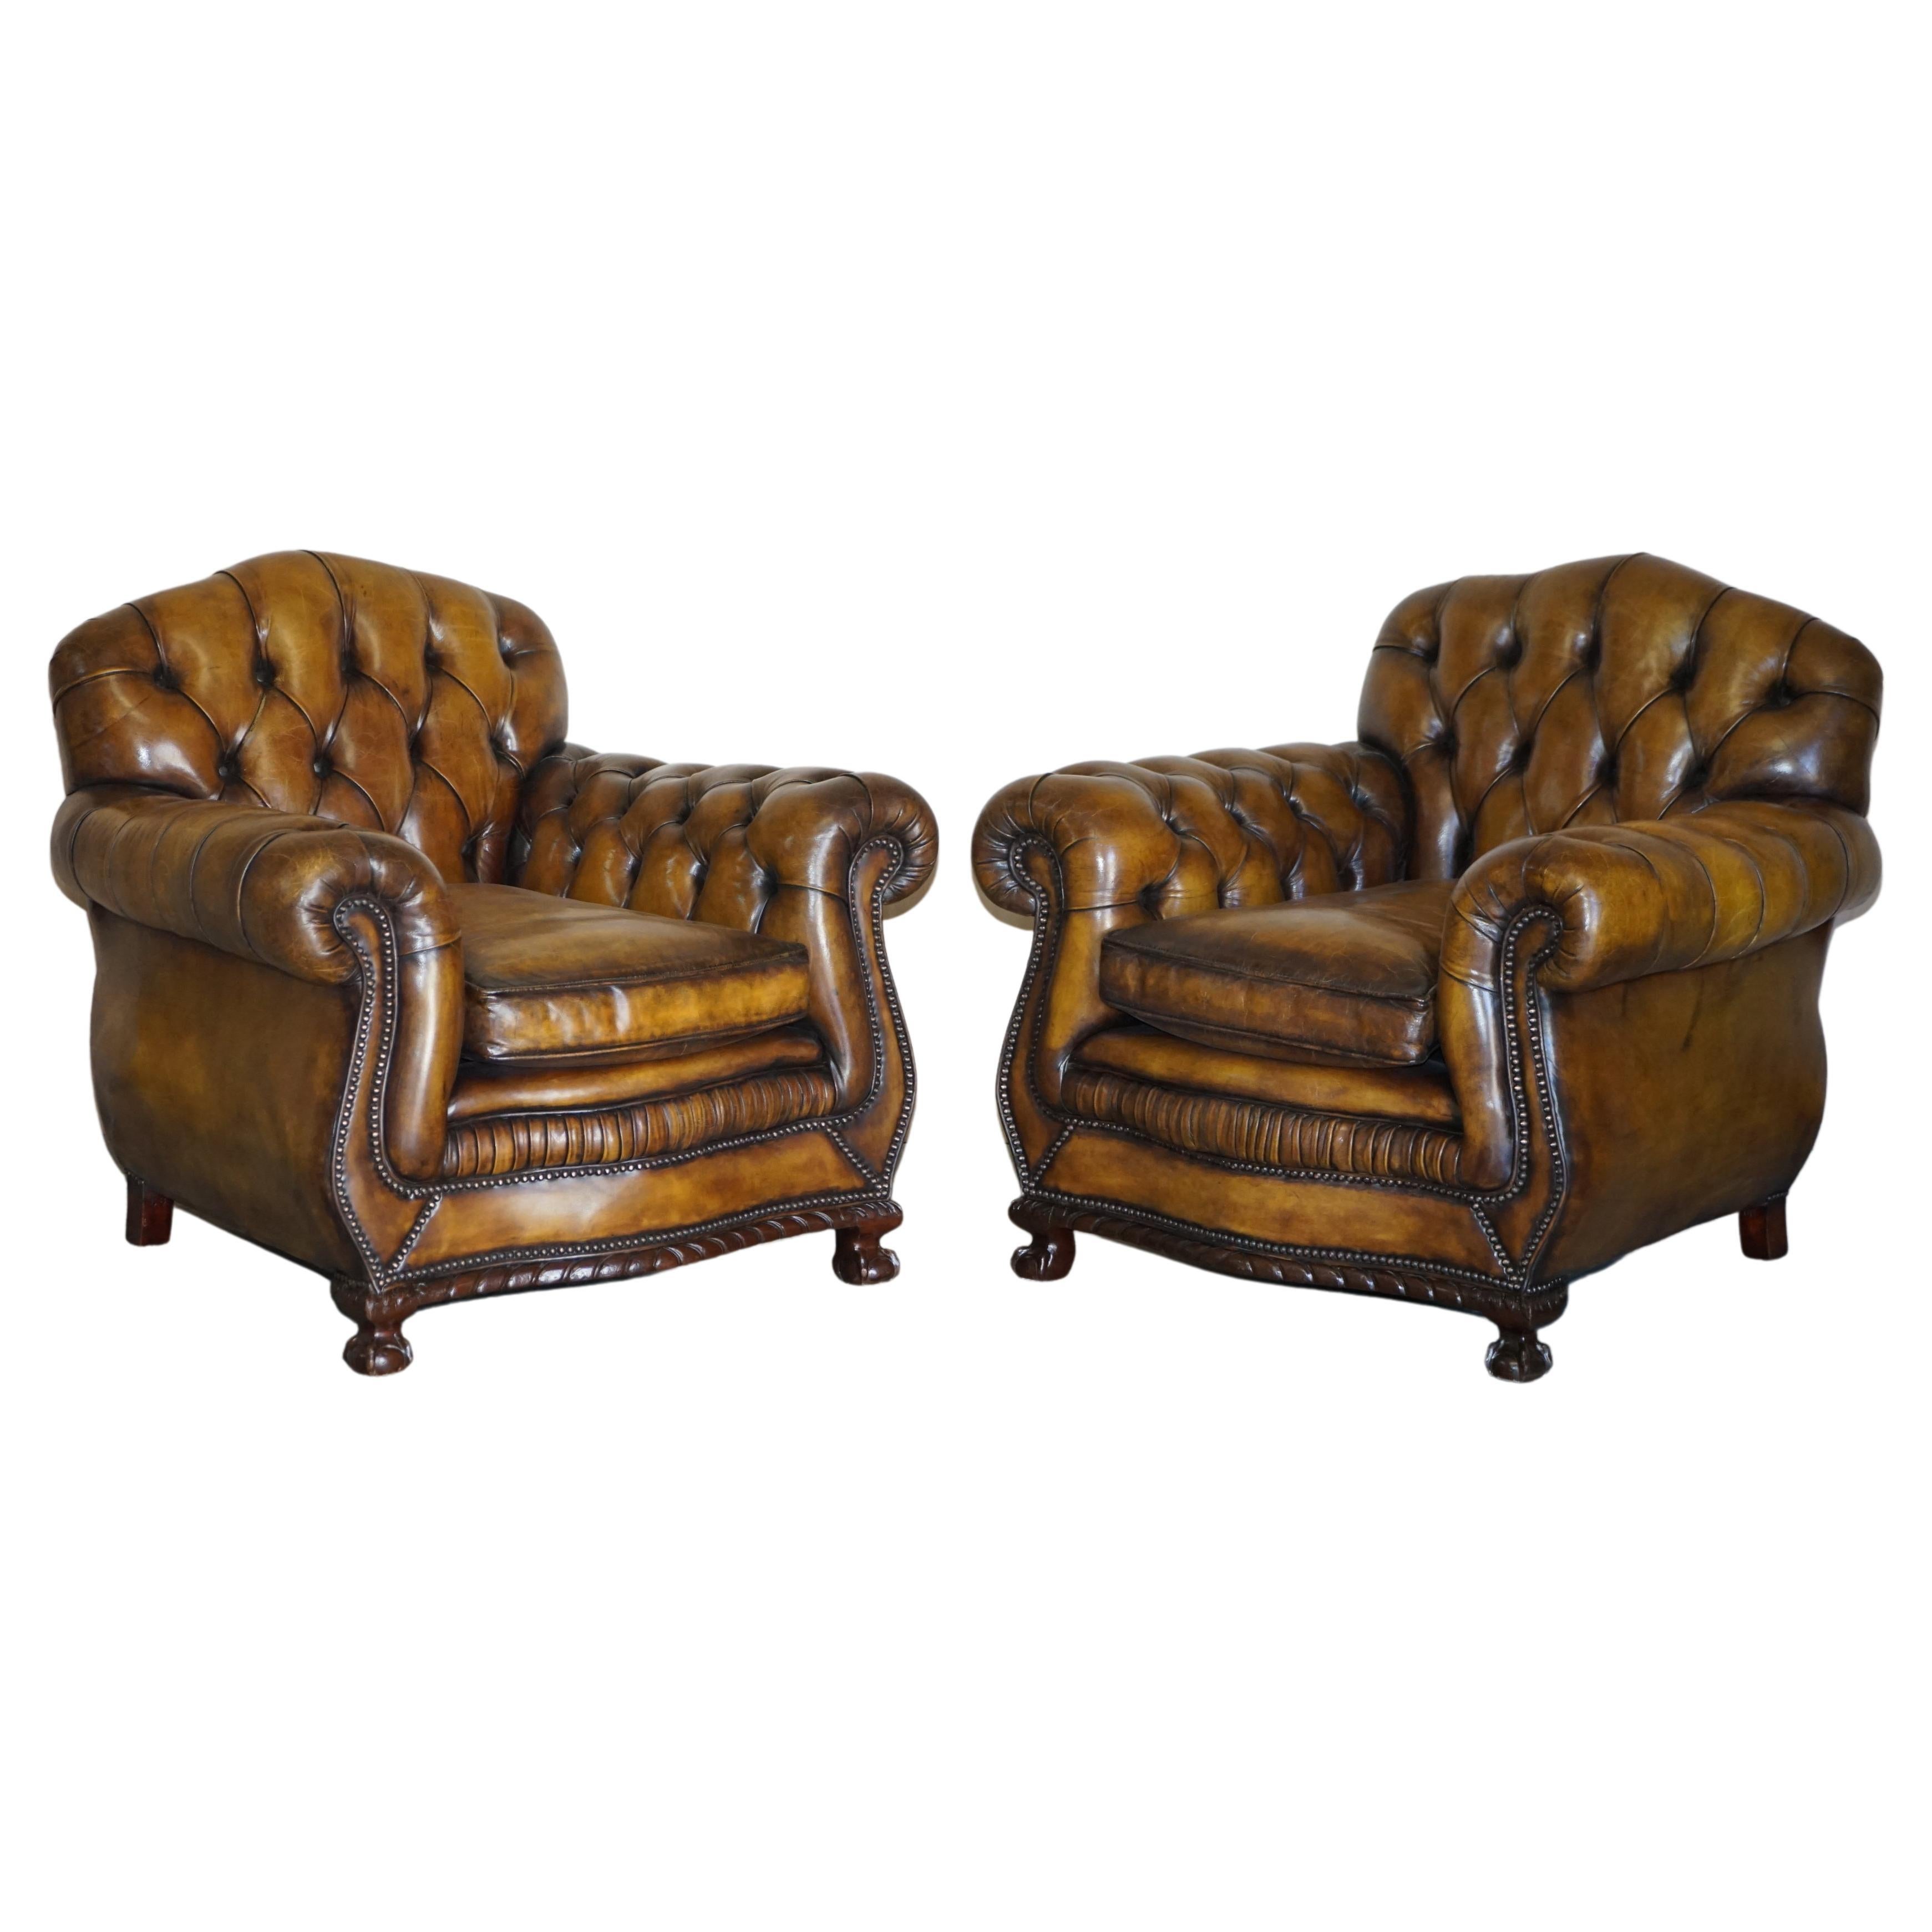 Antique Pair of Thomas Chippendale Style Chesterfield Brown Leather Armchairs